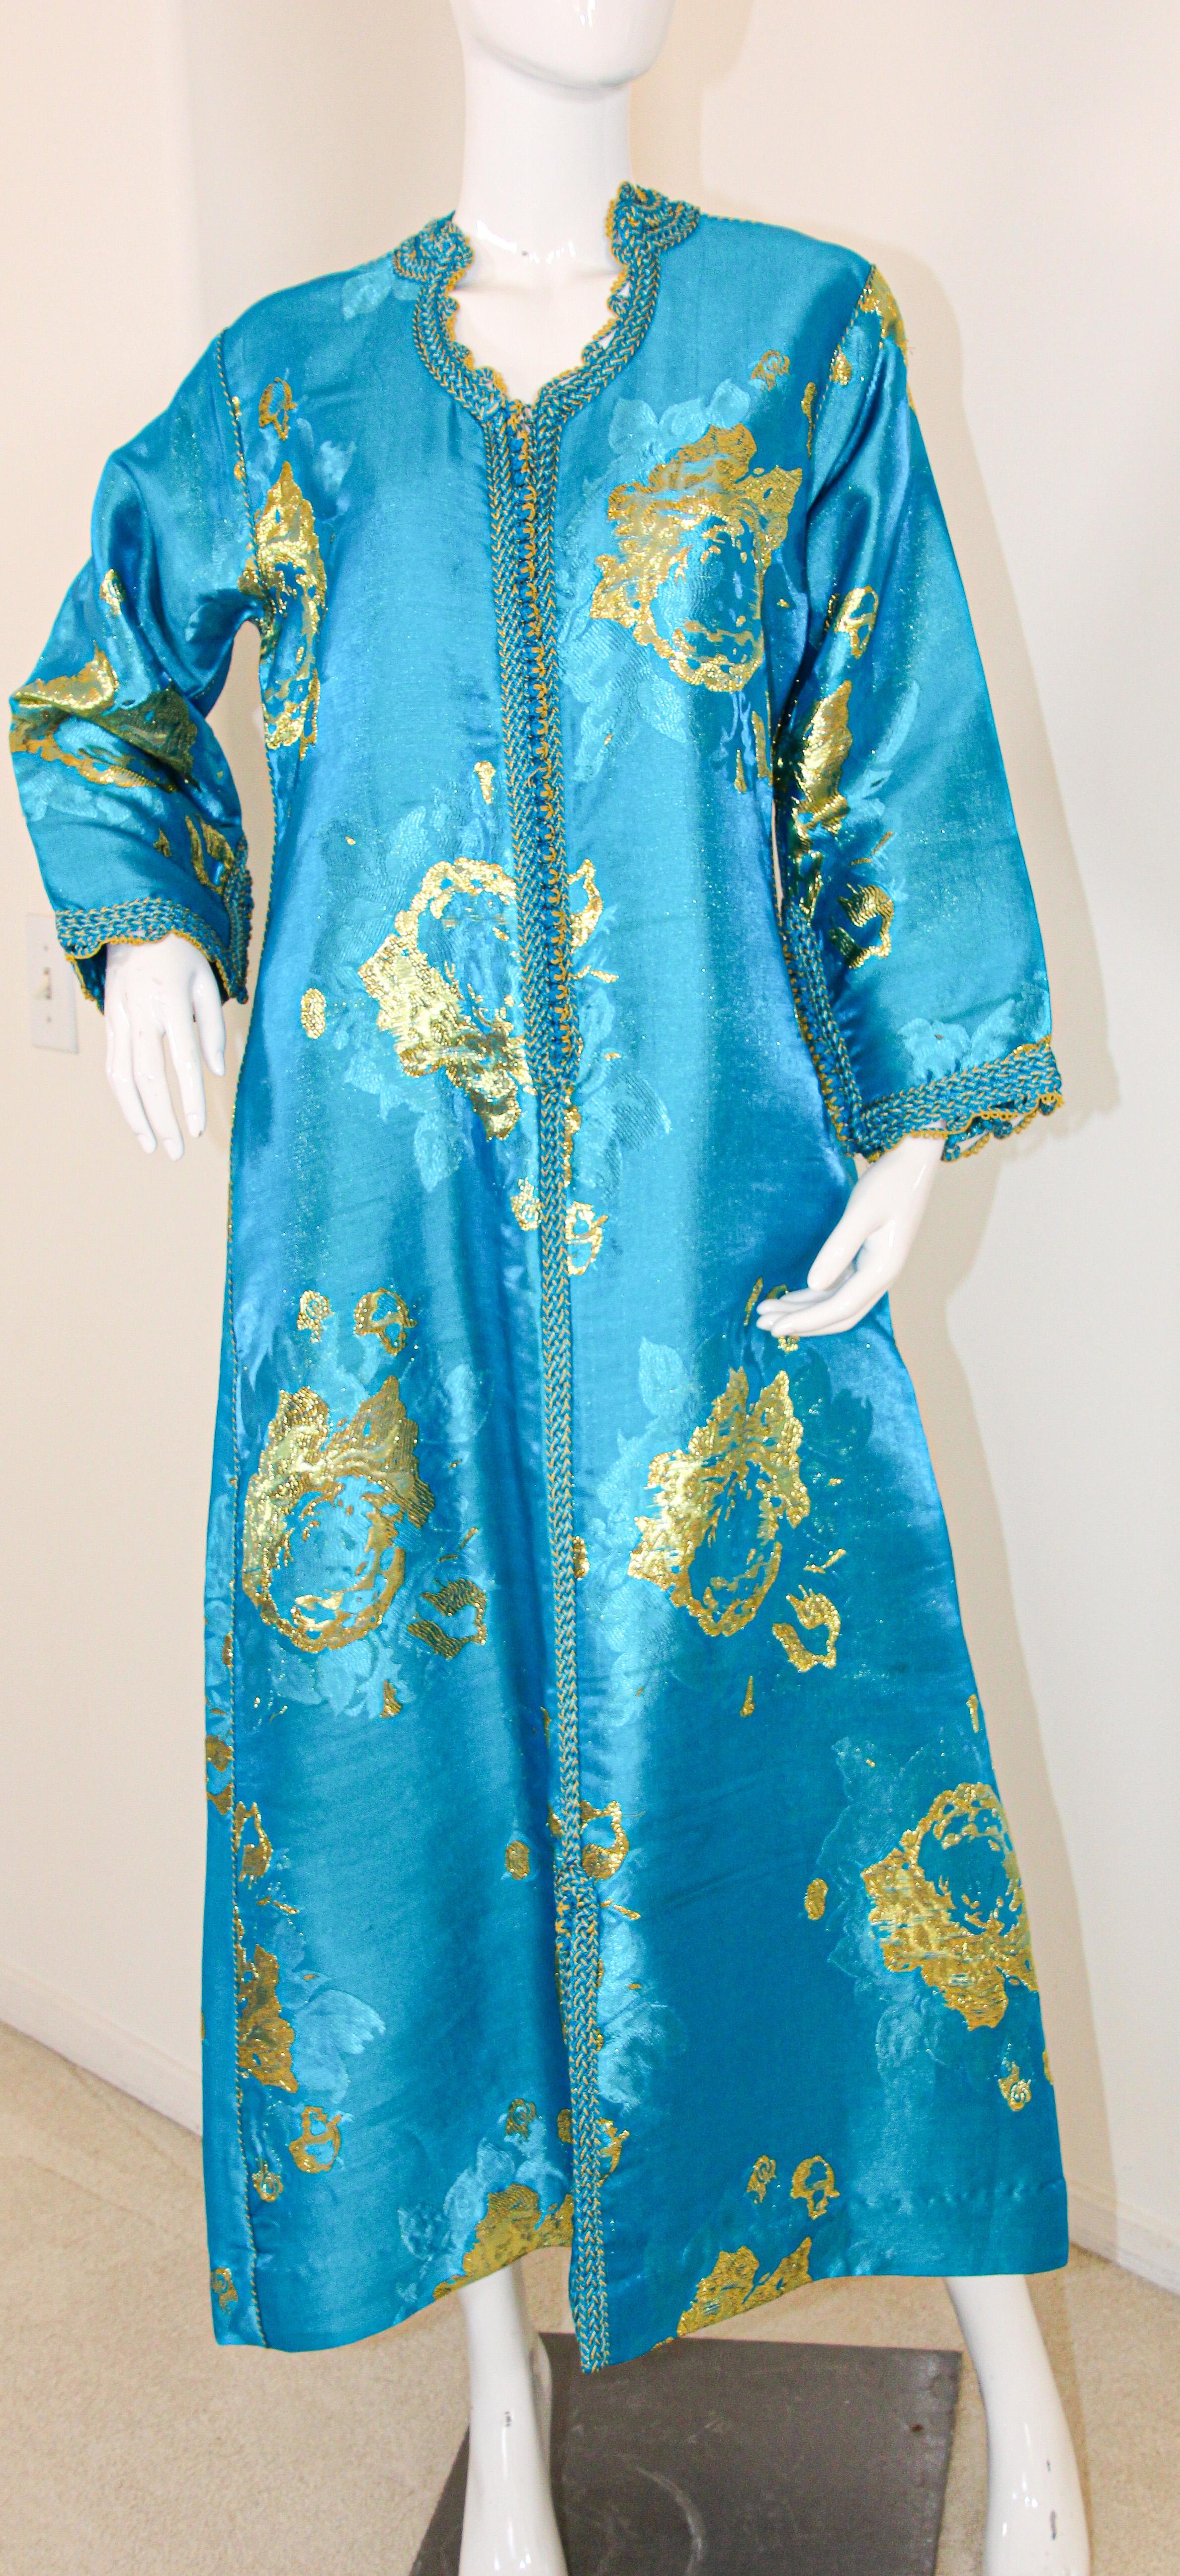 Moroccan Kaftan in Turquoise and Gold Floral Brocade Metallic Lame 12